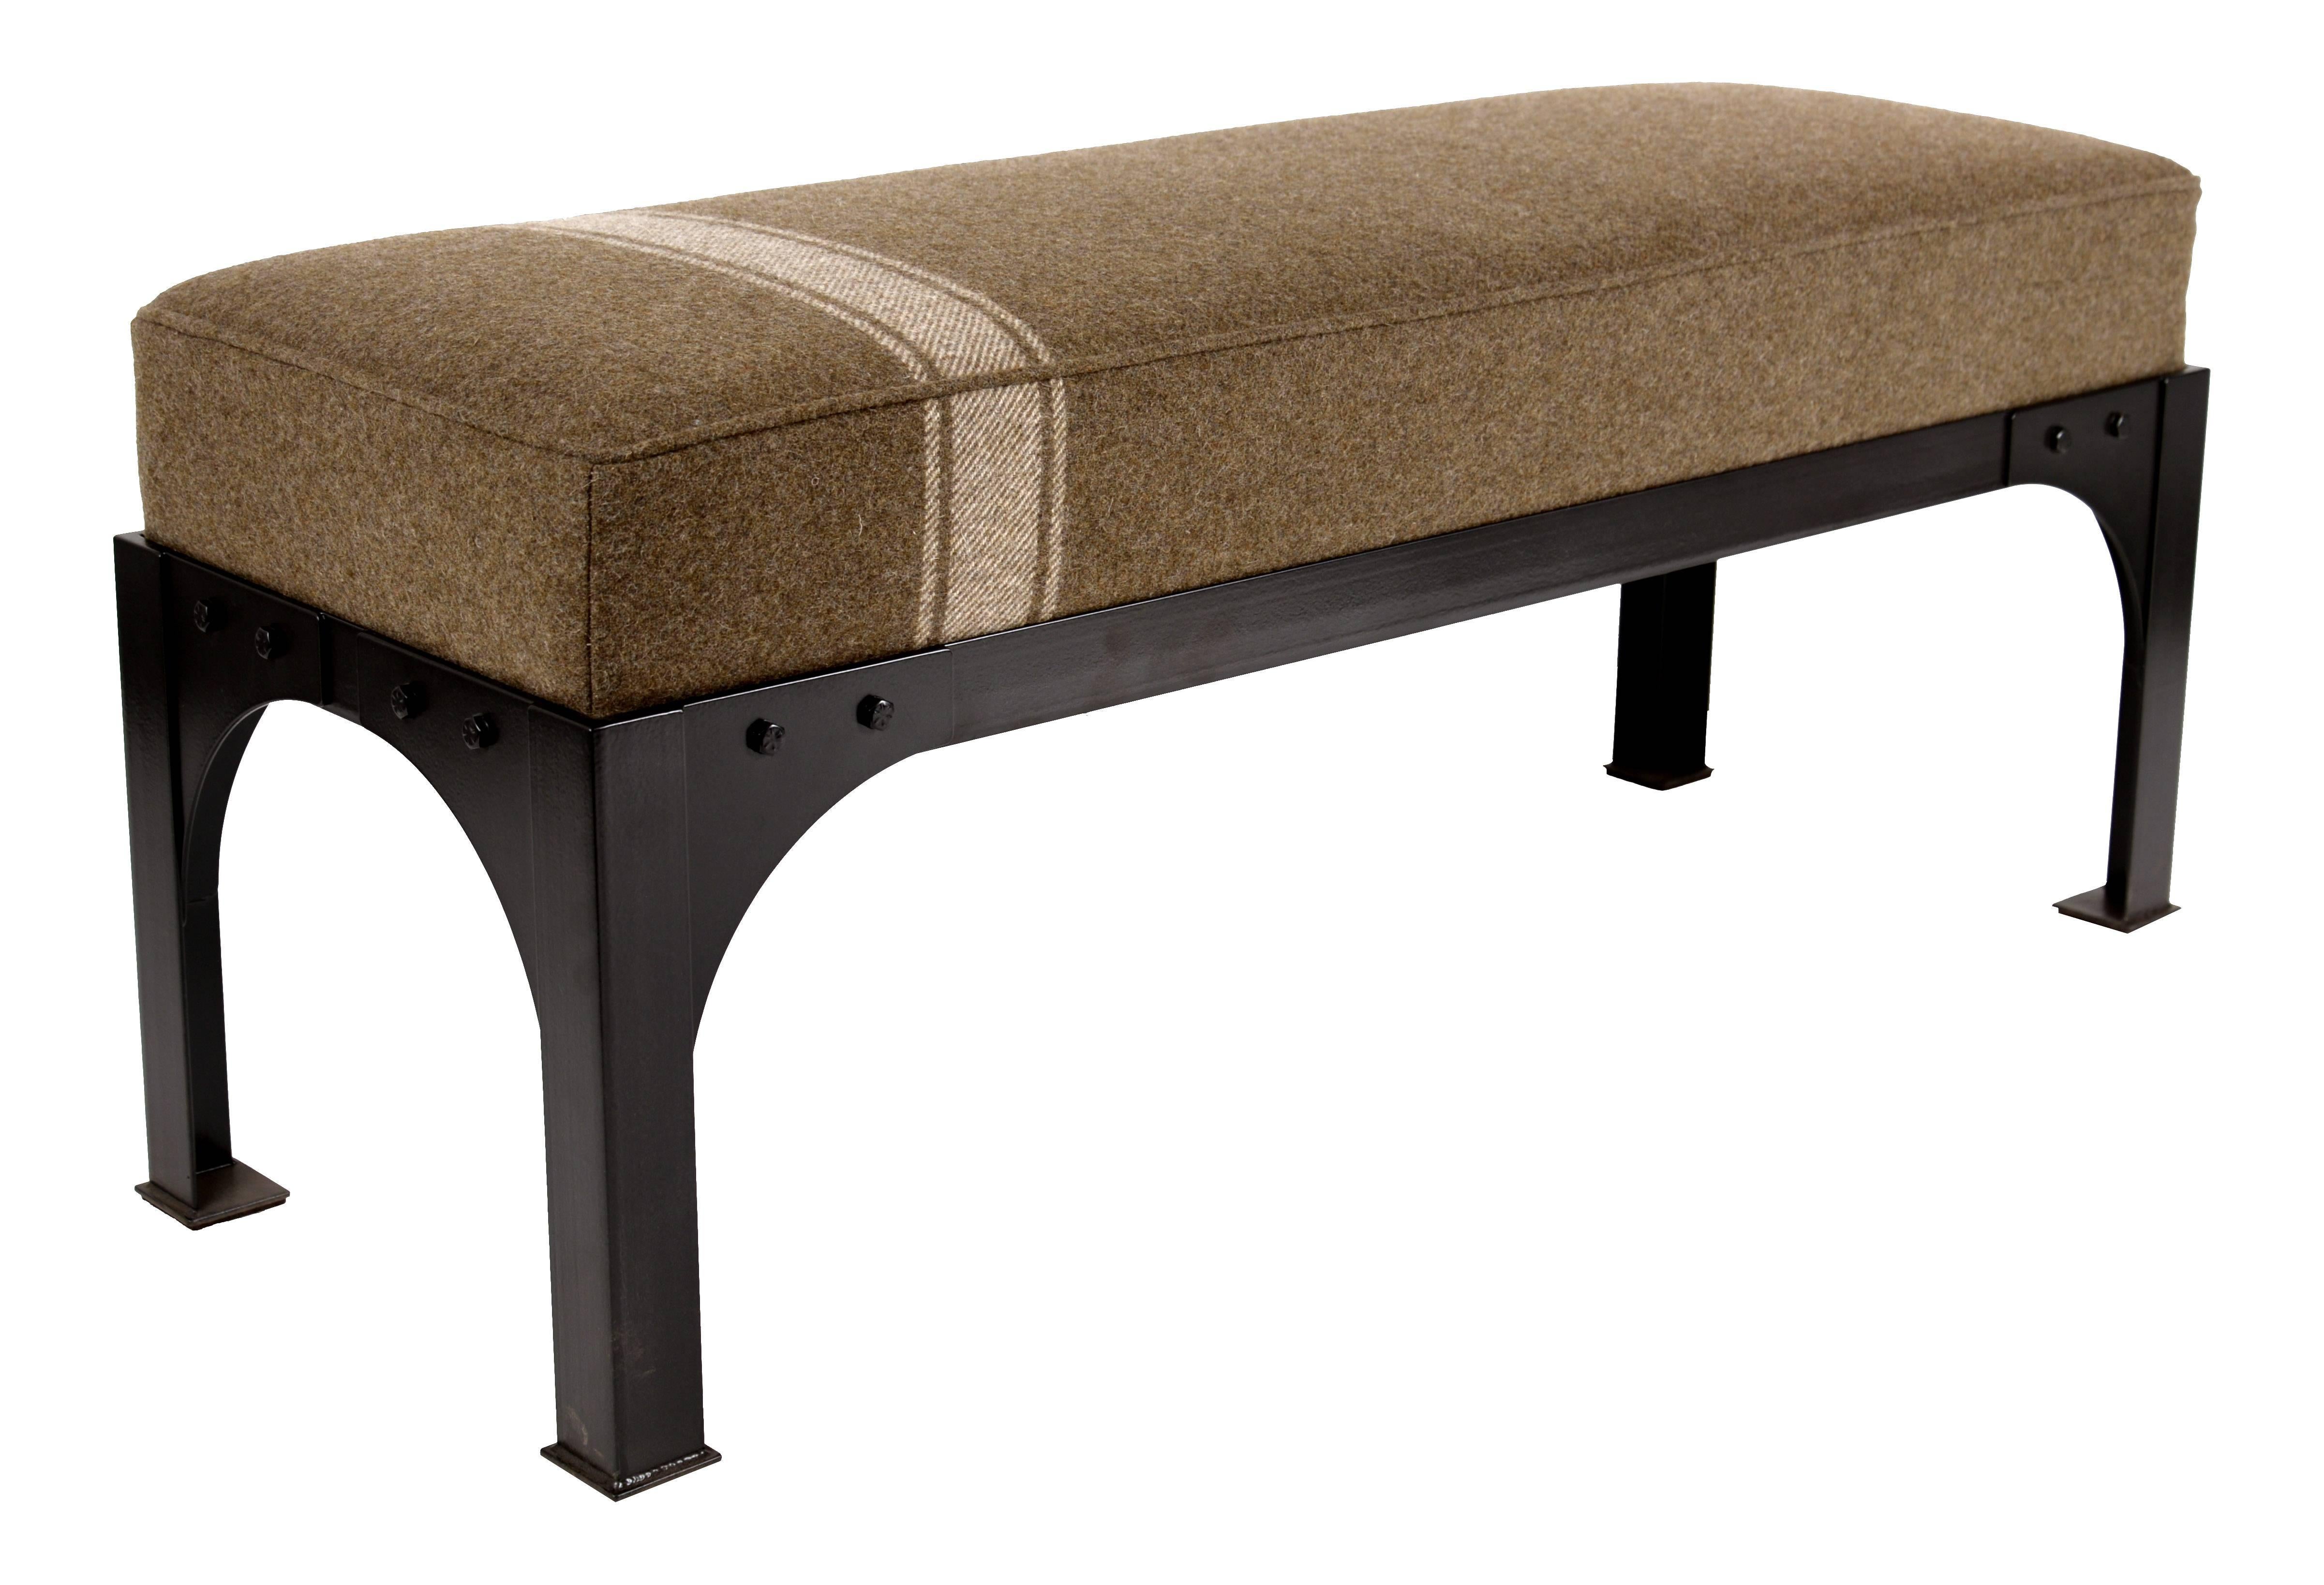 Kiln-dried, alder interior frame with eight-way, hand-tied spring construction cushion. Blackened steel base with curved gussets and square pad feet. Upholstered in a vintage wool Italian Military blanket (limited quantities of the vintage